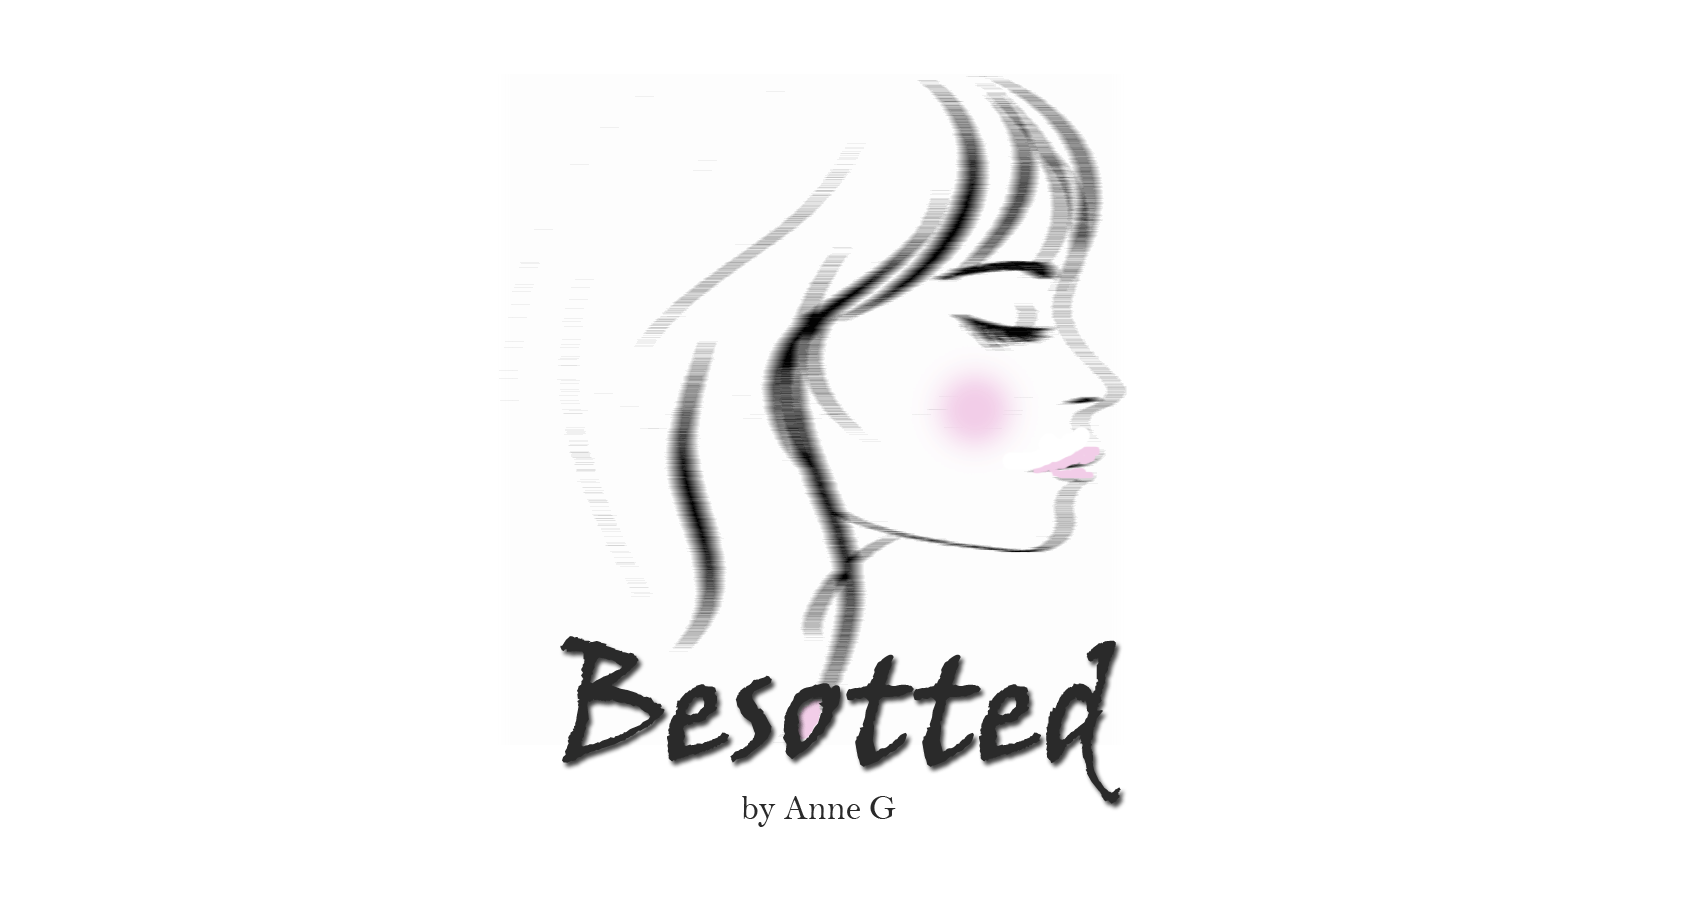 spillwords poem Besotted by Anne G